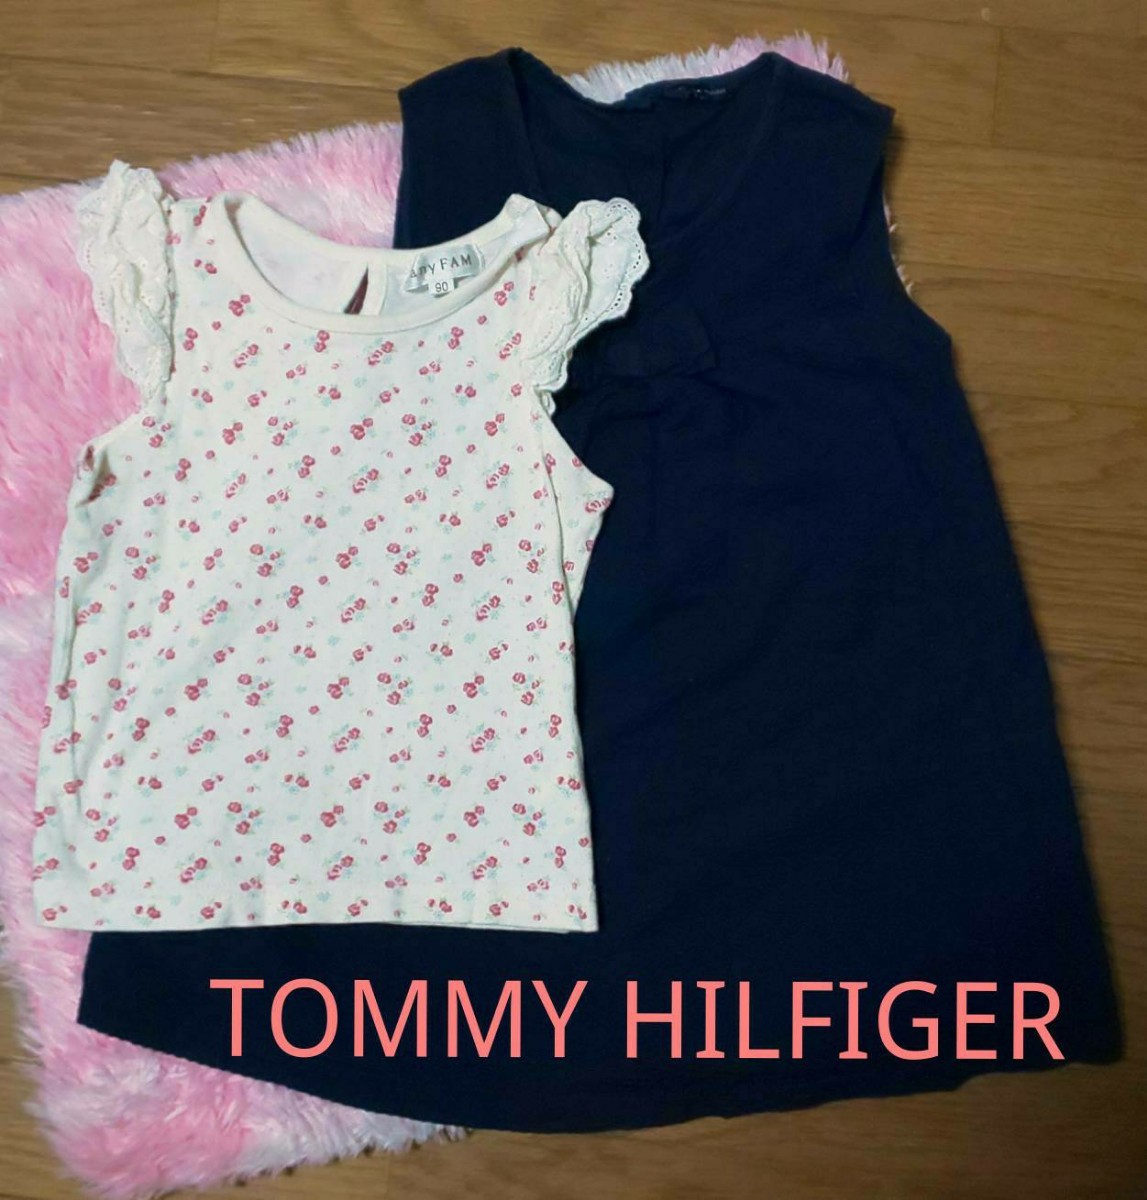 Paypayフリマ 子供服 Tommy Hilfiger ワンピース Any Fam タンク セット